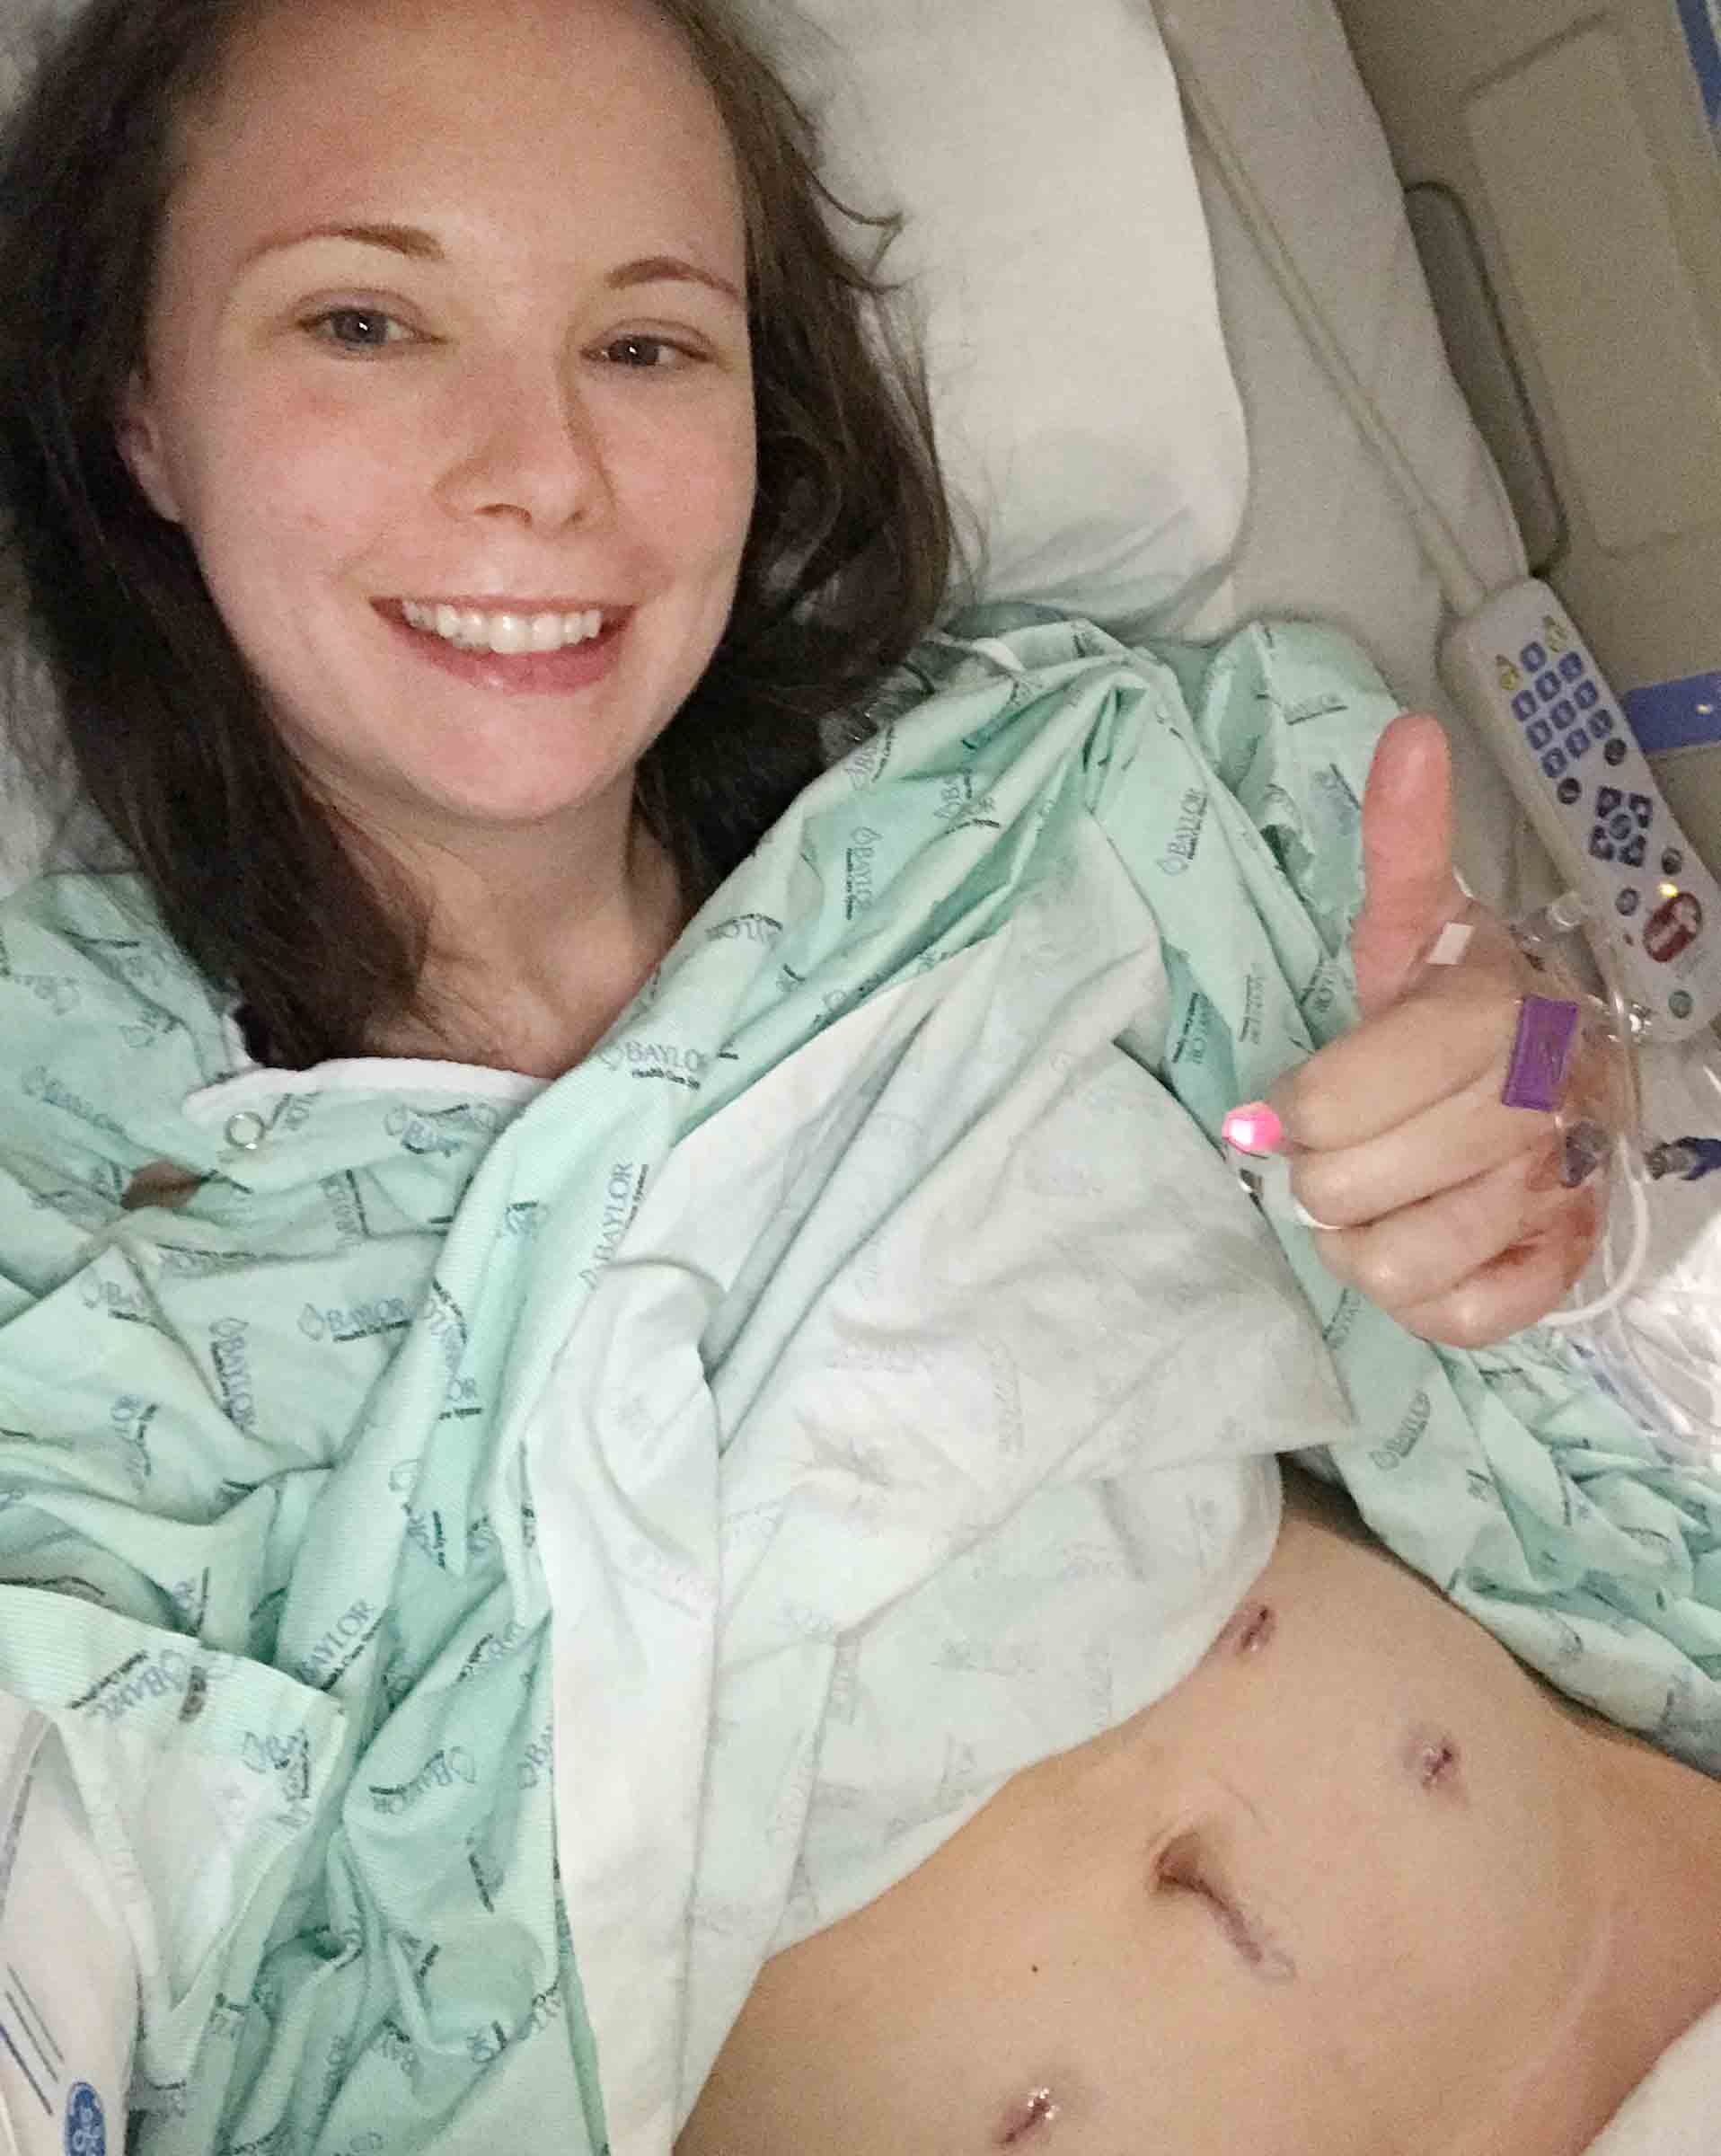 Heather Bankos in the hospital